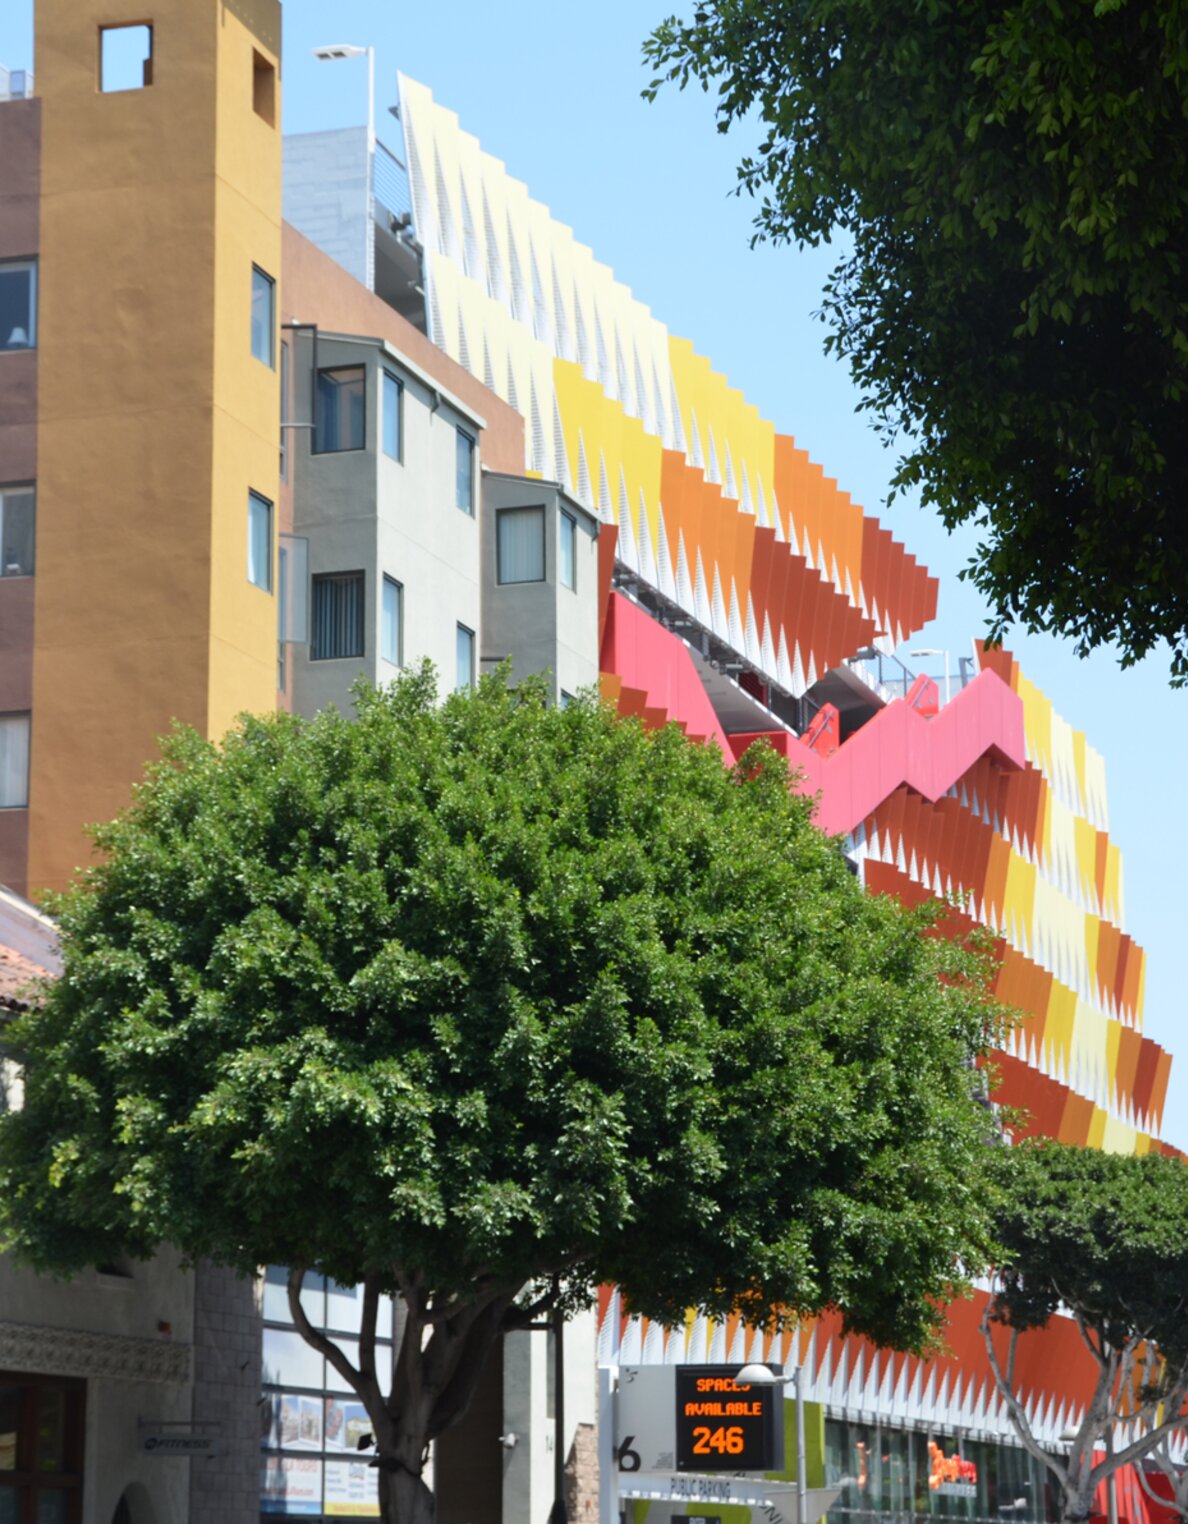 "InterContinental San Francisco" individual sandwich panels by POHL Facades